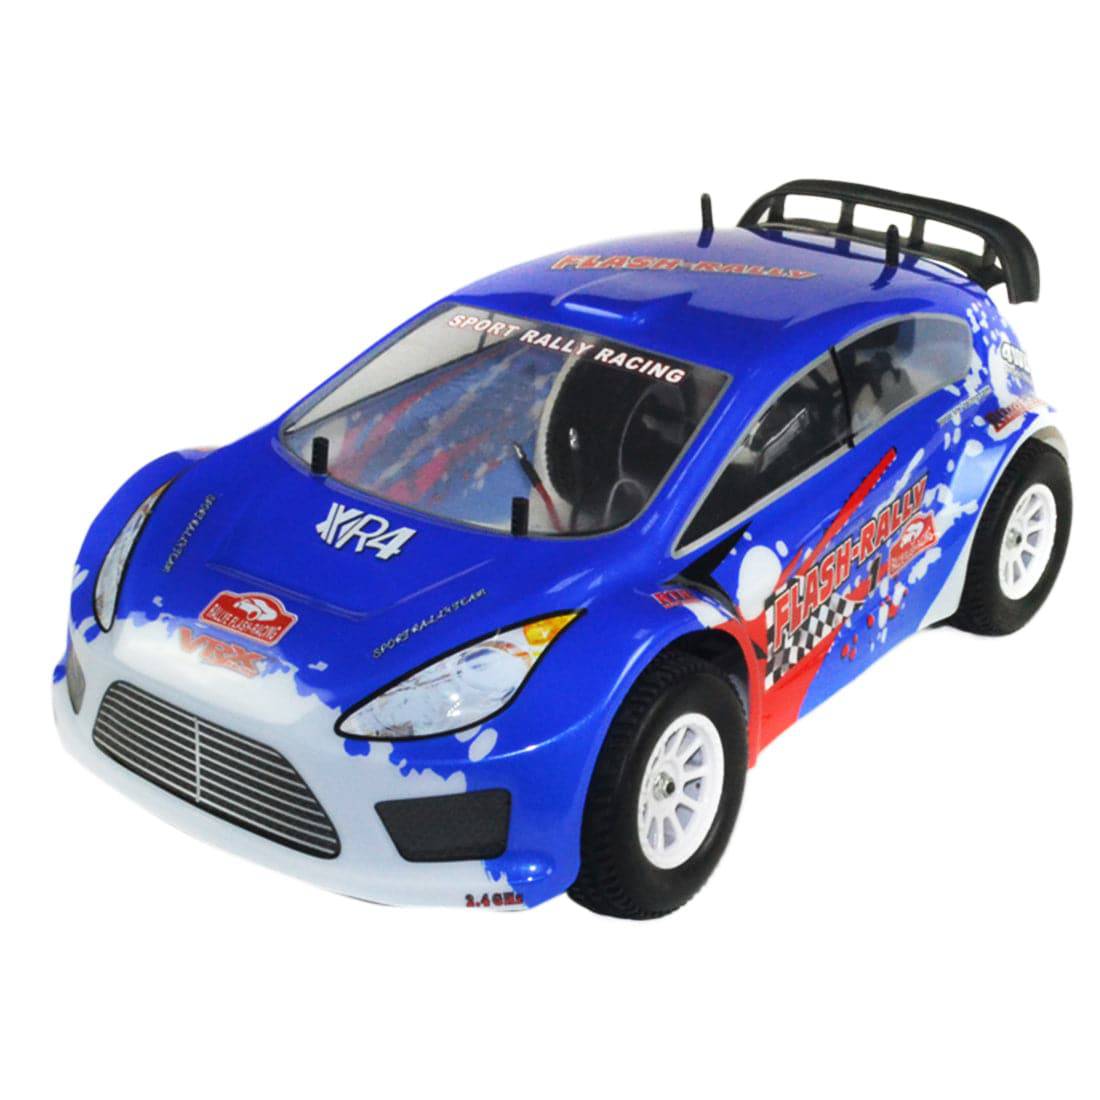 VRX RH1028 XR4 EBL 1/10 2.4GHz 4WD High Speed Brushless RTR Off-road Rally